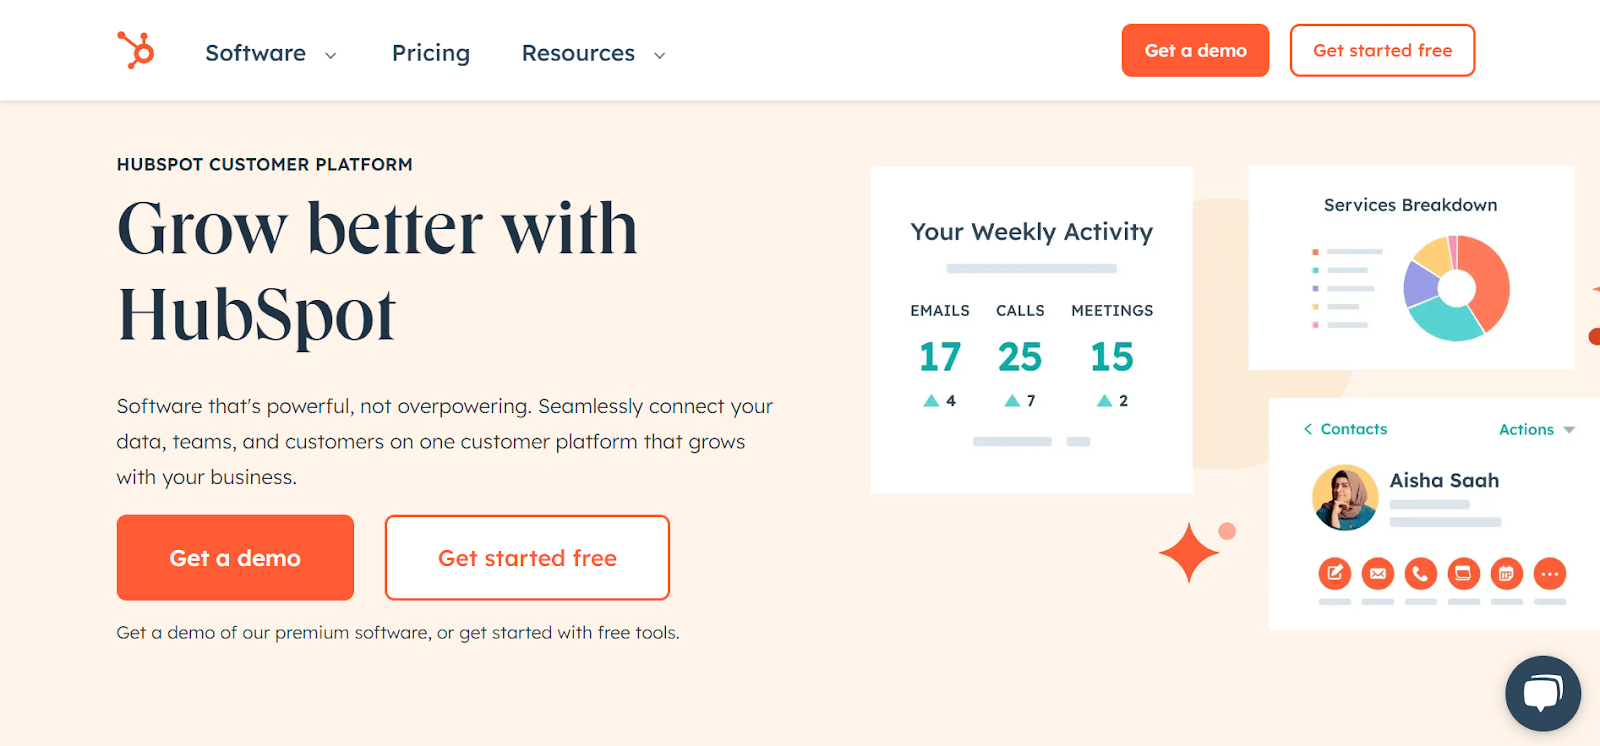 HubSpot offers a range of tools for growth-centric marketing efforts